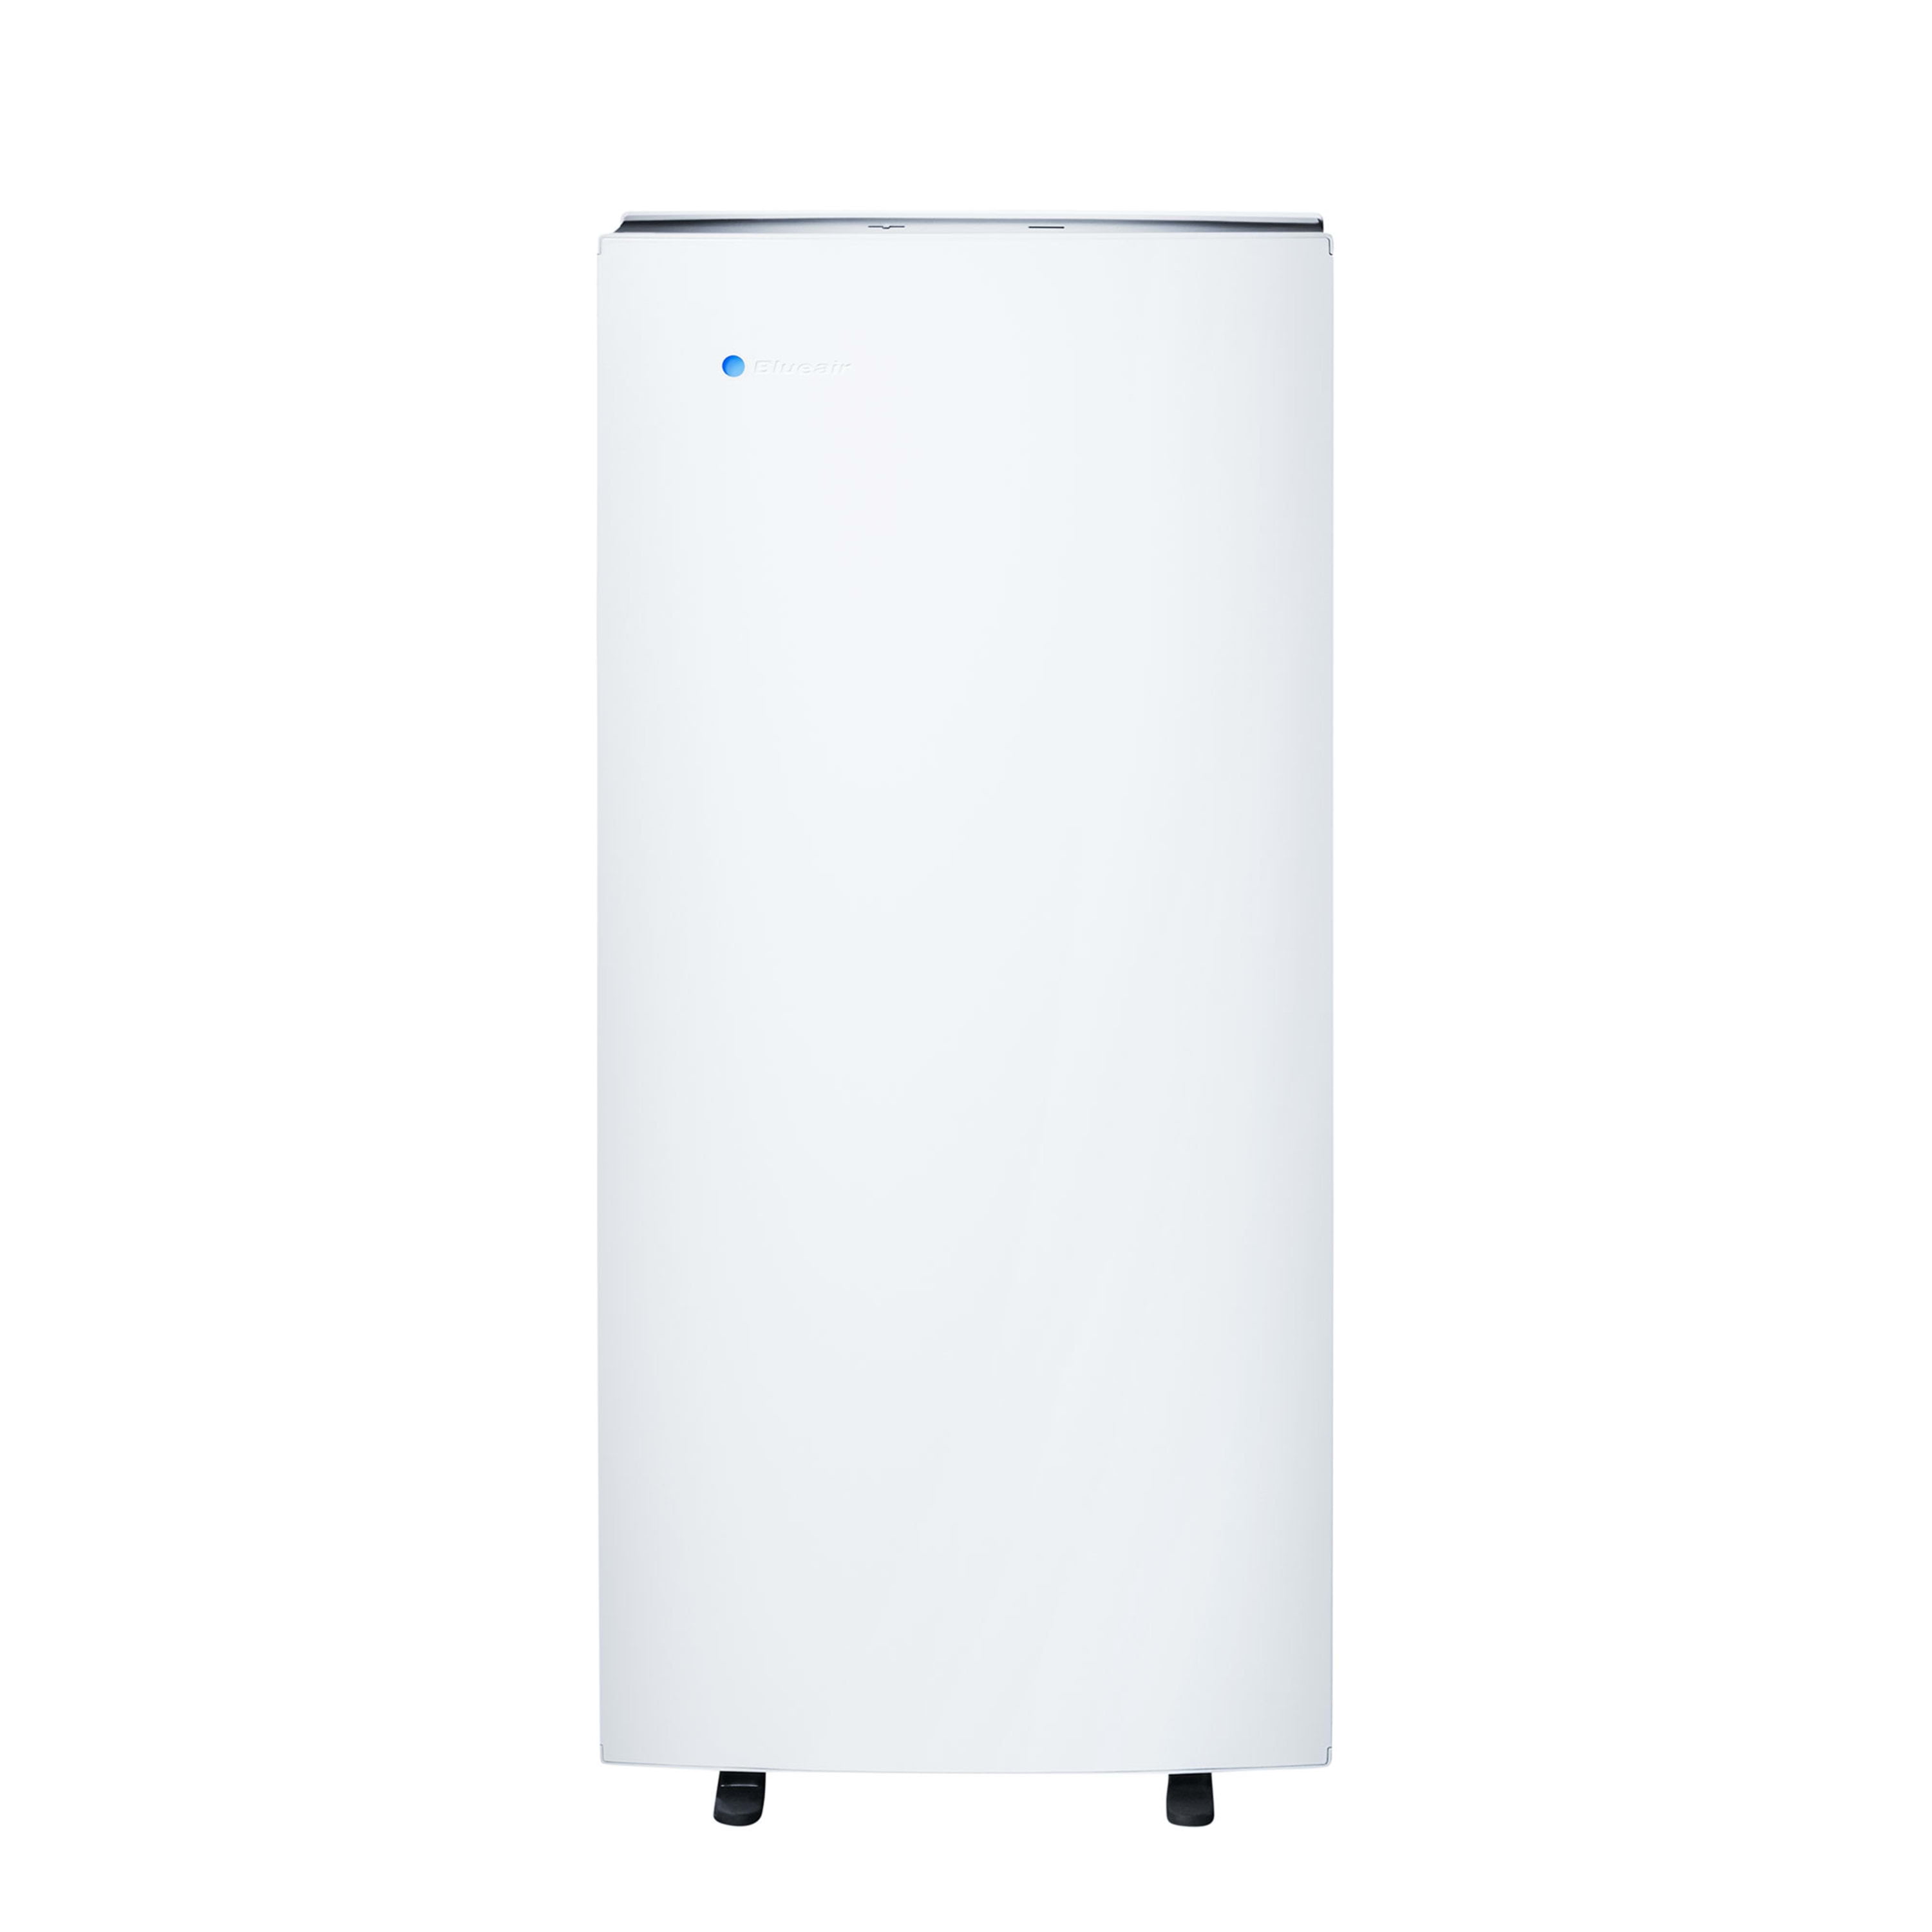 Blueair Pro L Air Purifier, Mold, Smoke and Dust Remover, High 